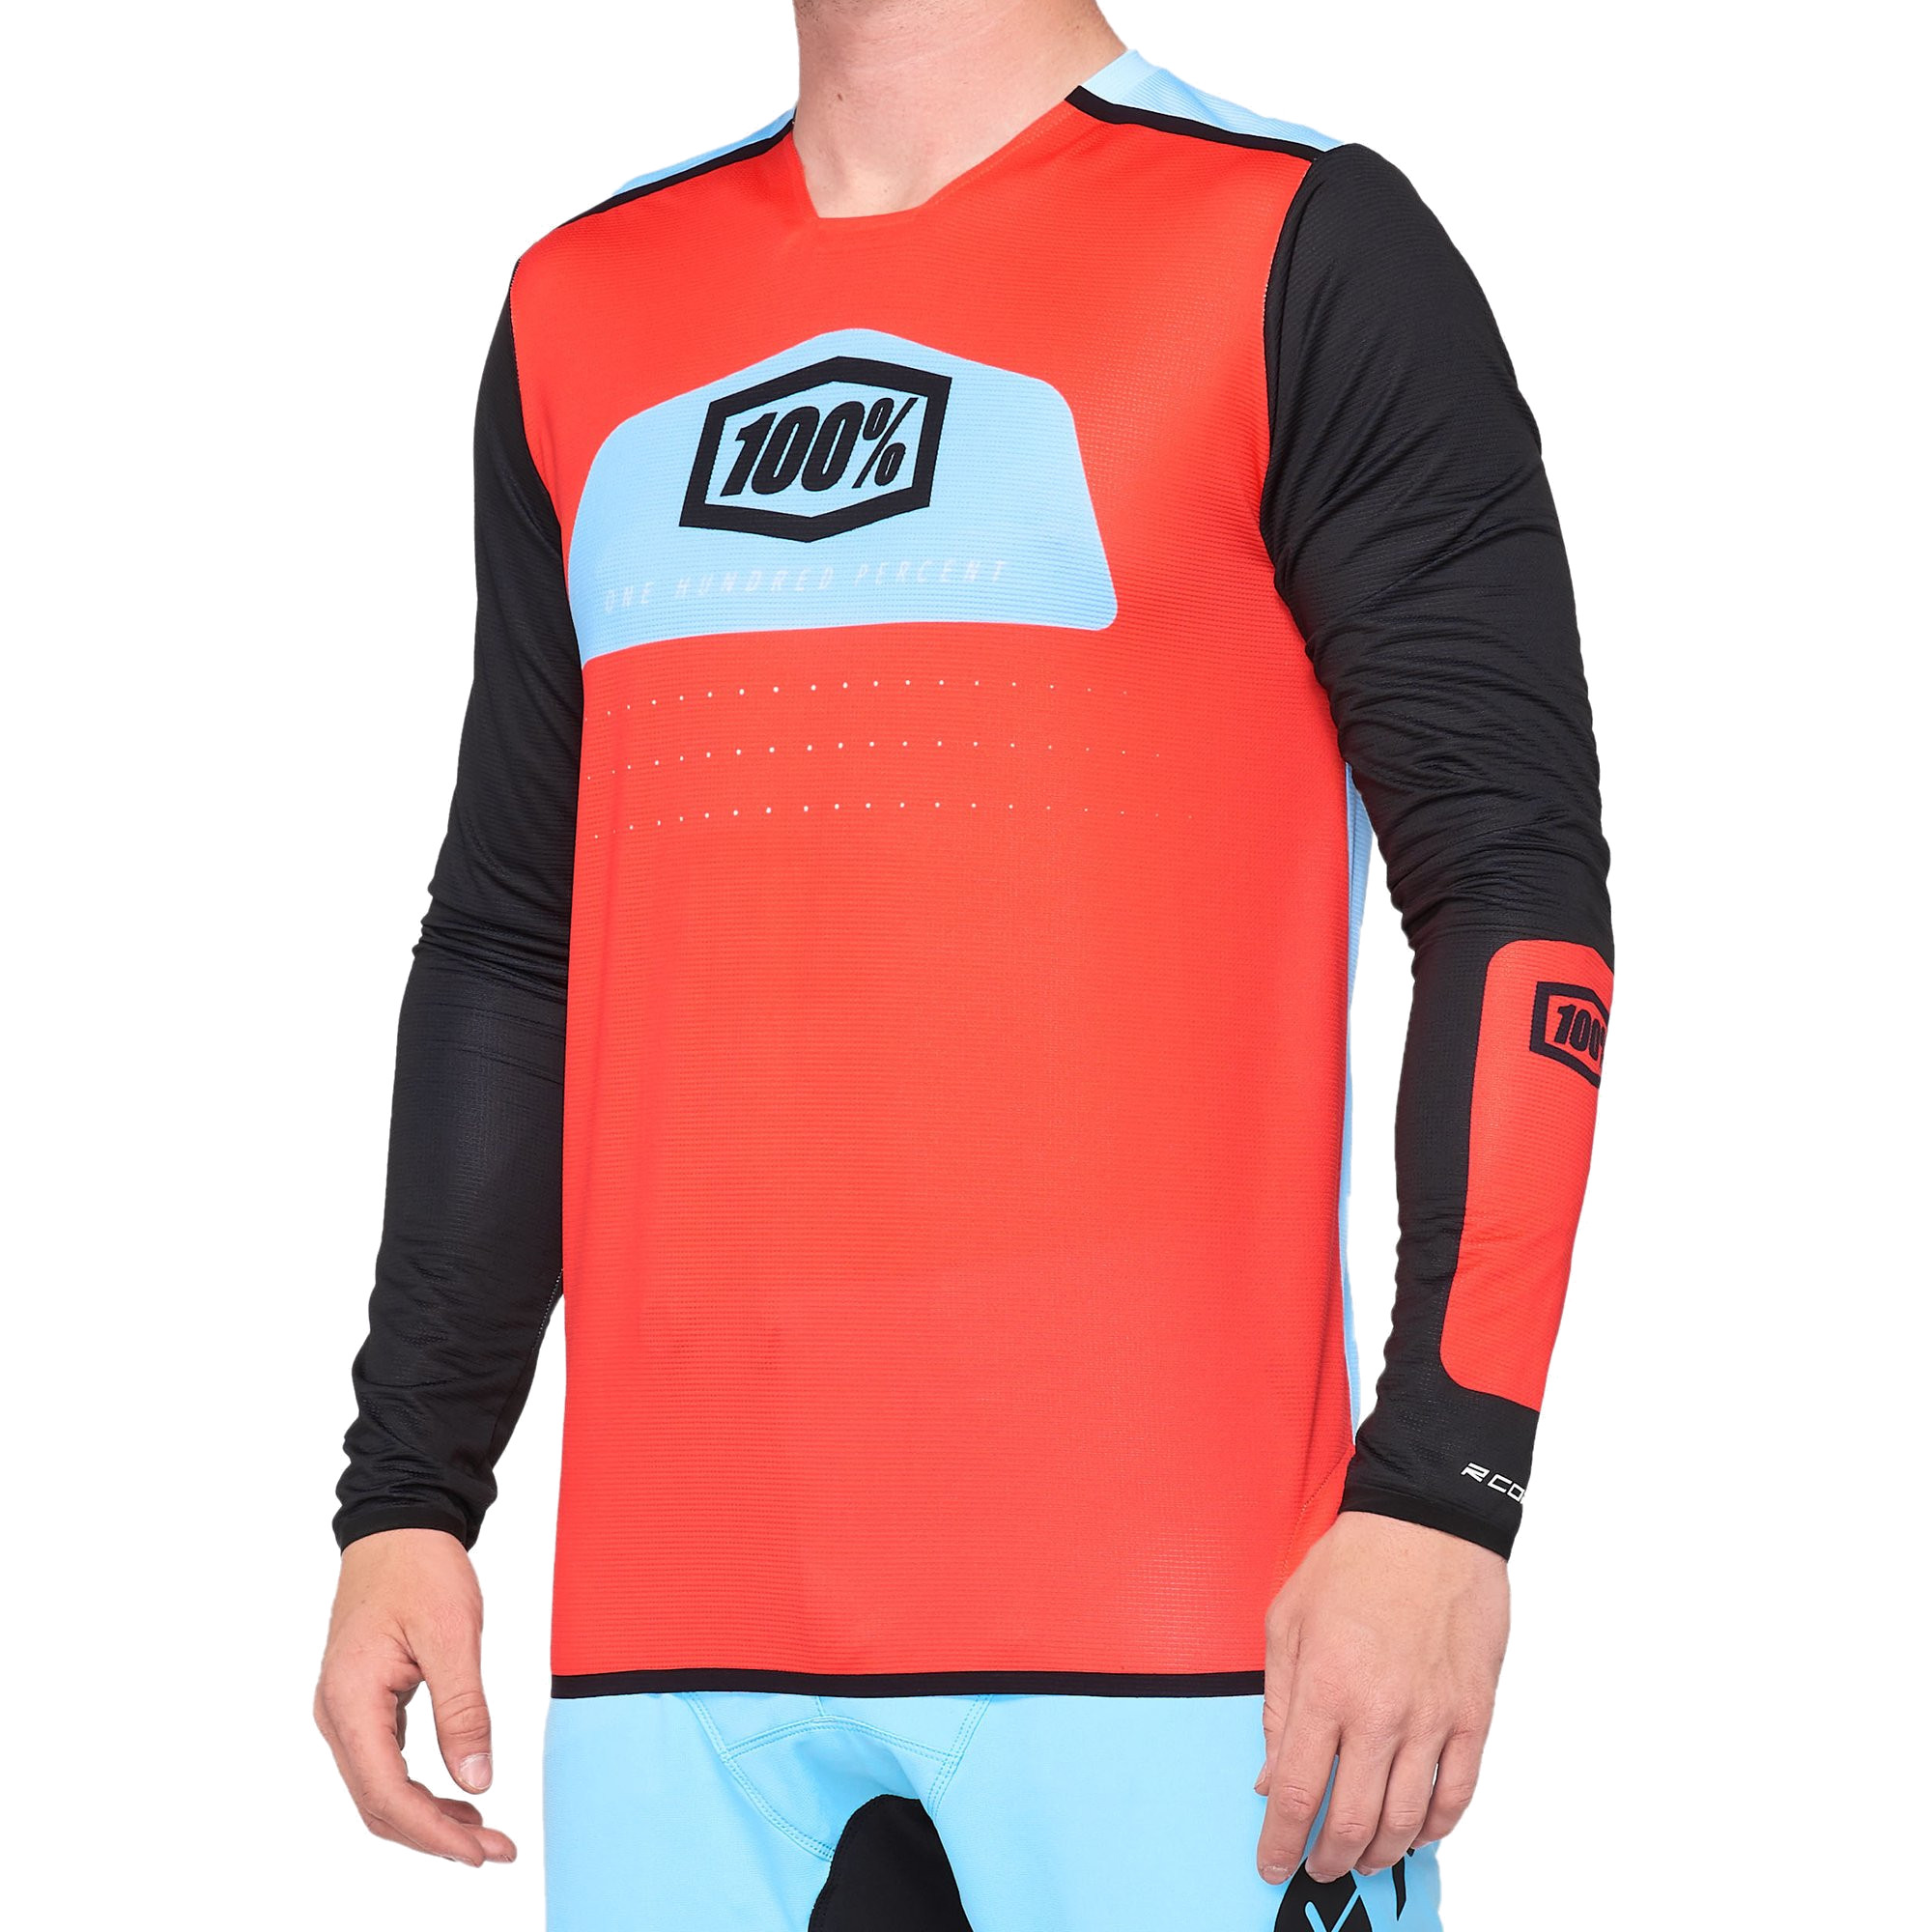 100% - R-CORE X JERSEY FLUO RED BLACK